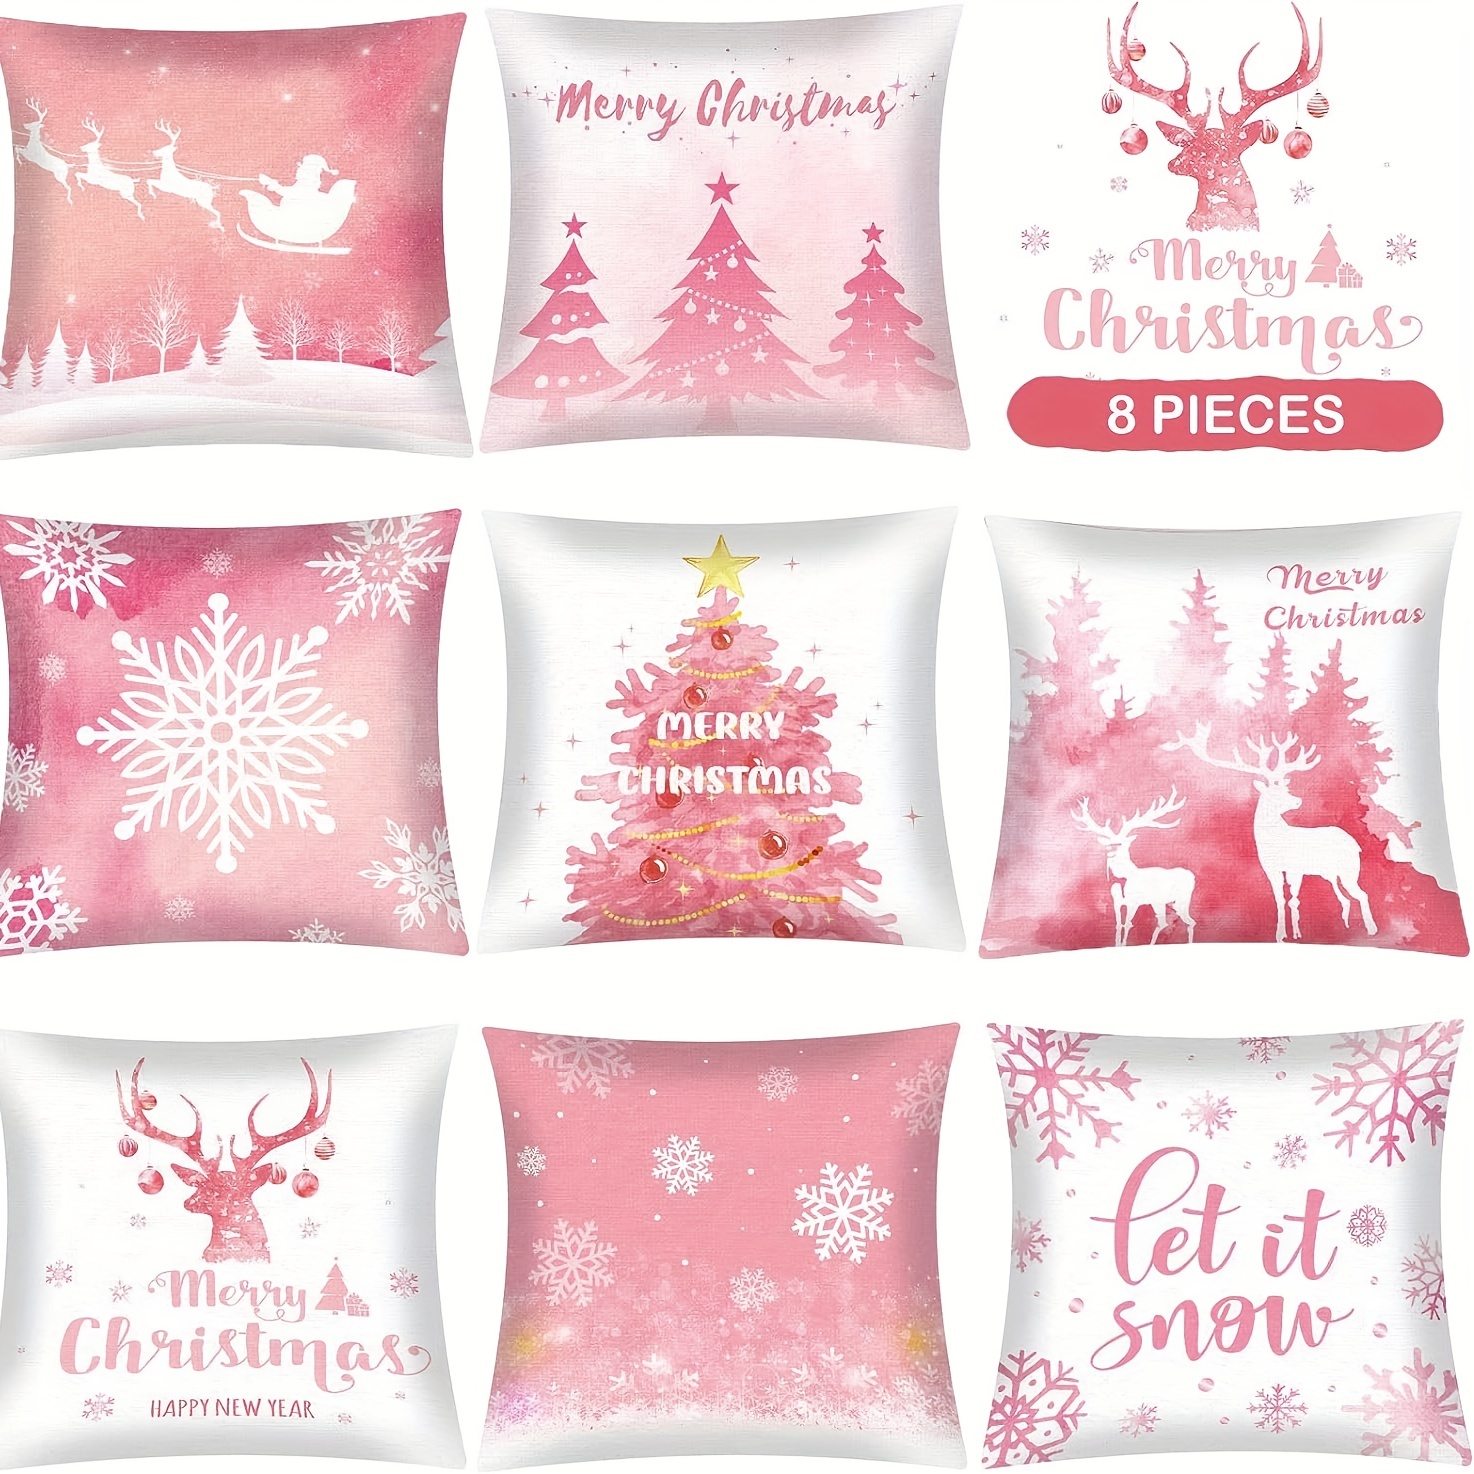 Christmas Pillow Covers 17.7x17.7 For Christmas Decorations Snowman Elk Christmas  Pillows Winter Holiday Throw Pillows Christmas Farmhouse Decor For Couch  Home Decor, Room Decor, Bedroom Decor, Living Room Decor (cushion Is Not